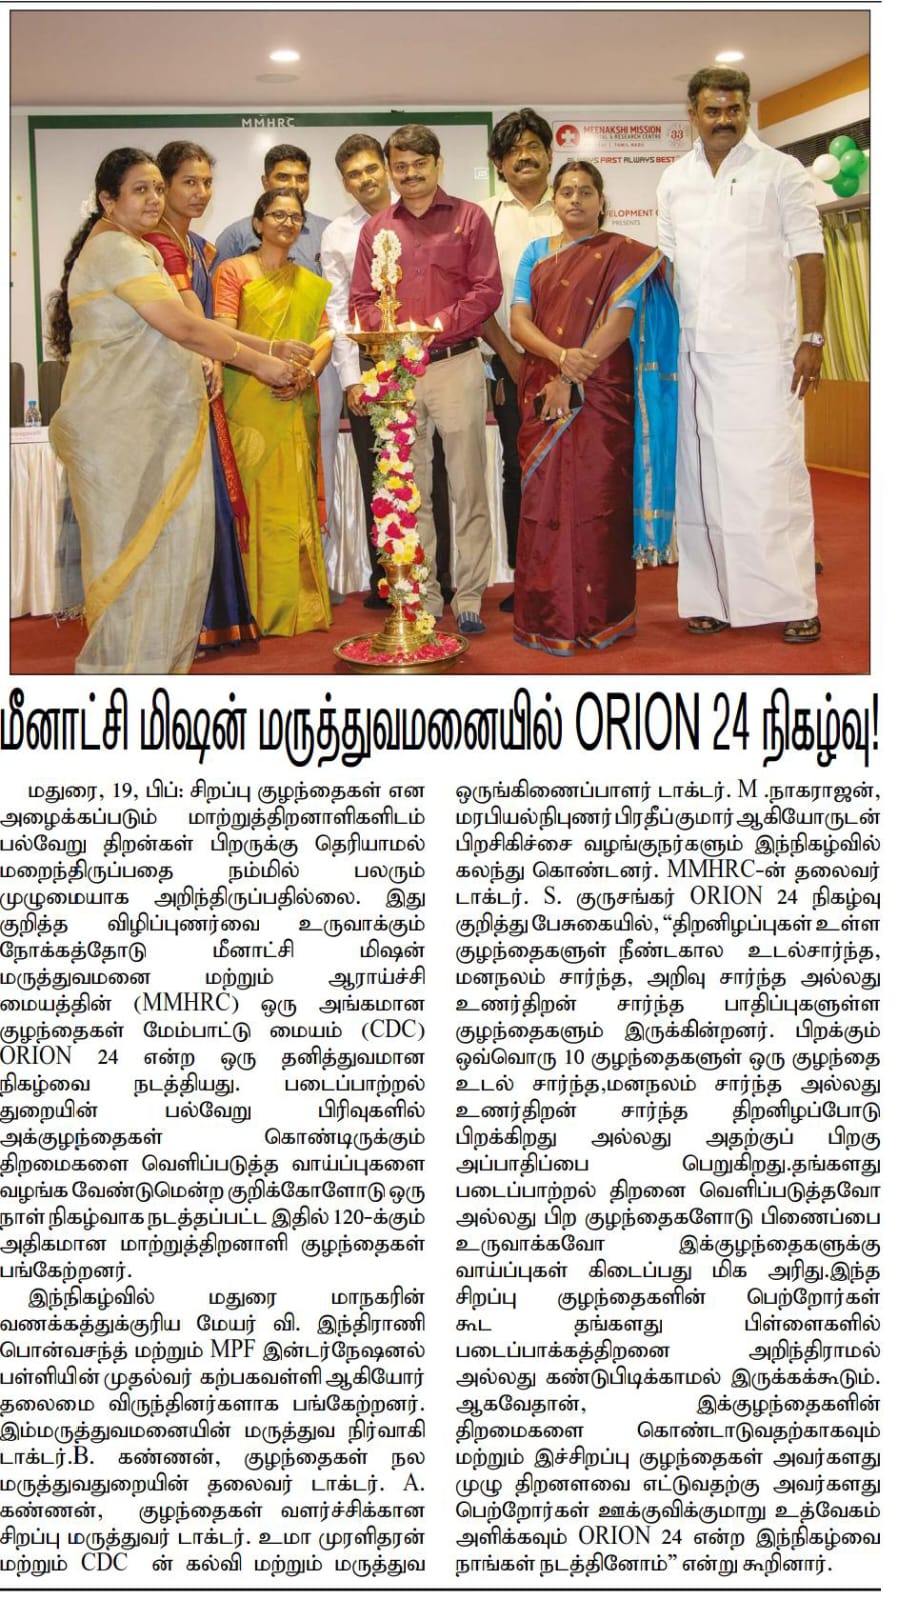 Meenakshi Mission Hospital’s Orion 24 Brings Out Special Talent of Over 120 Specially challenged children